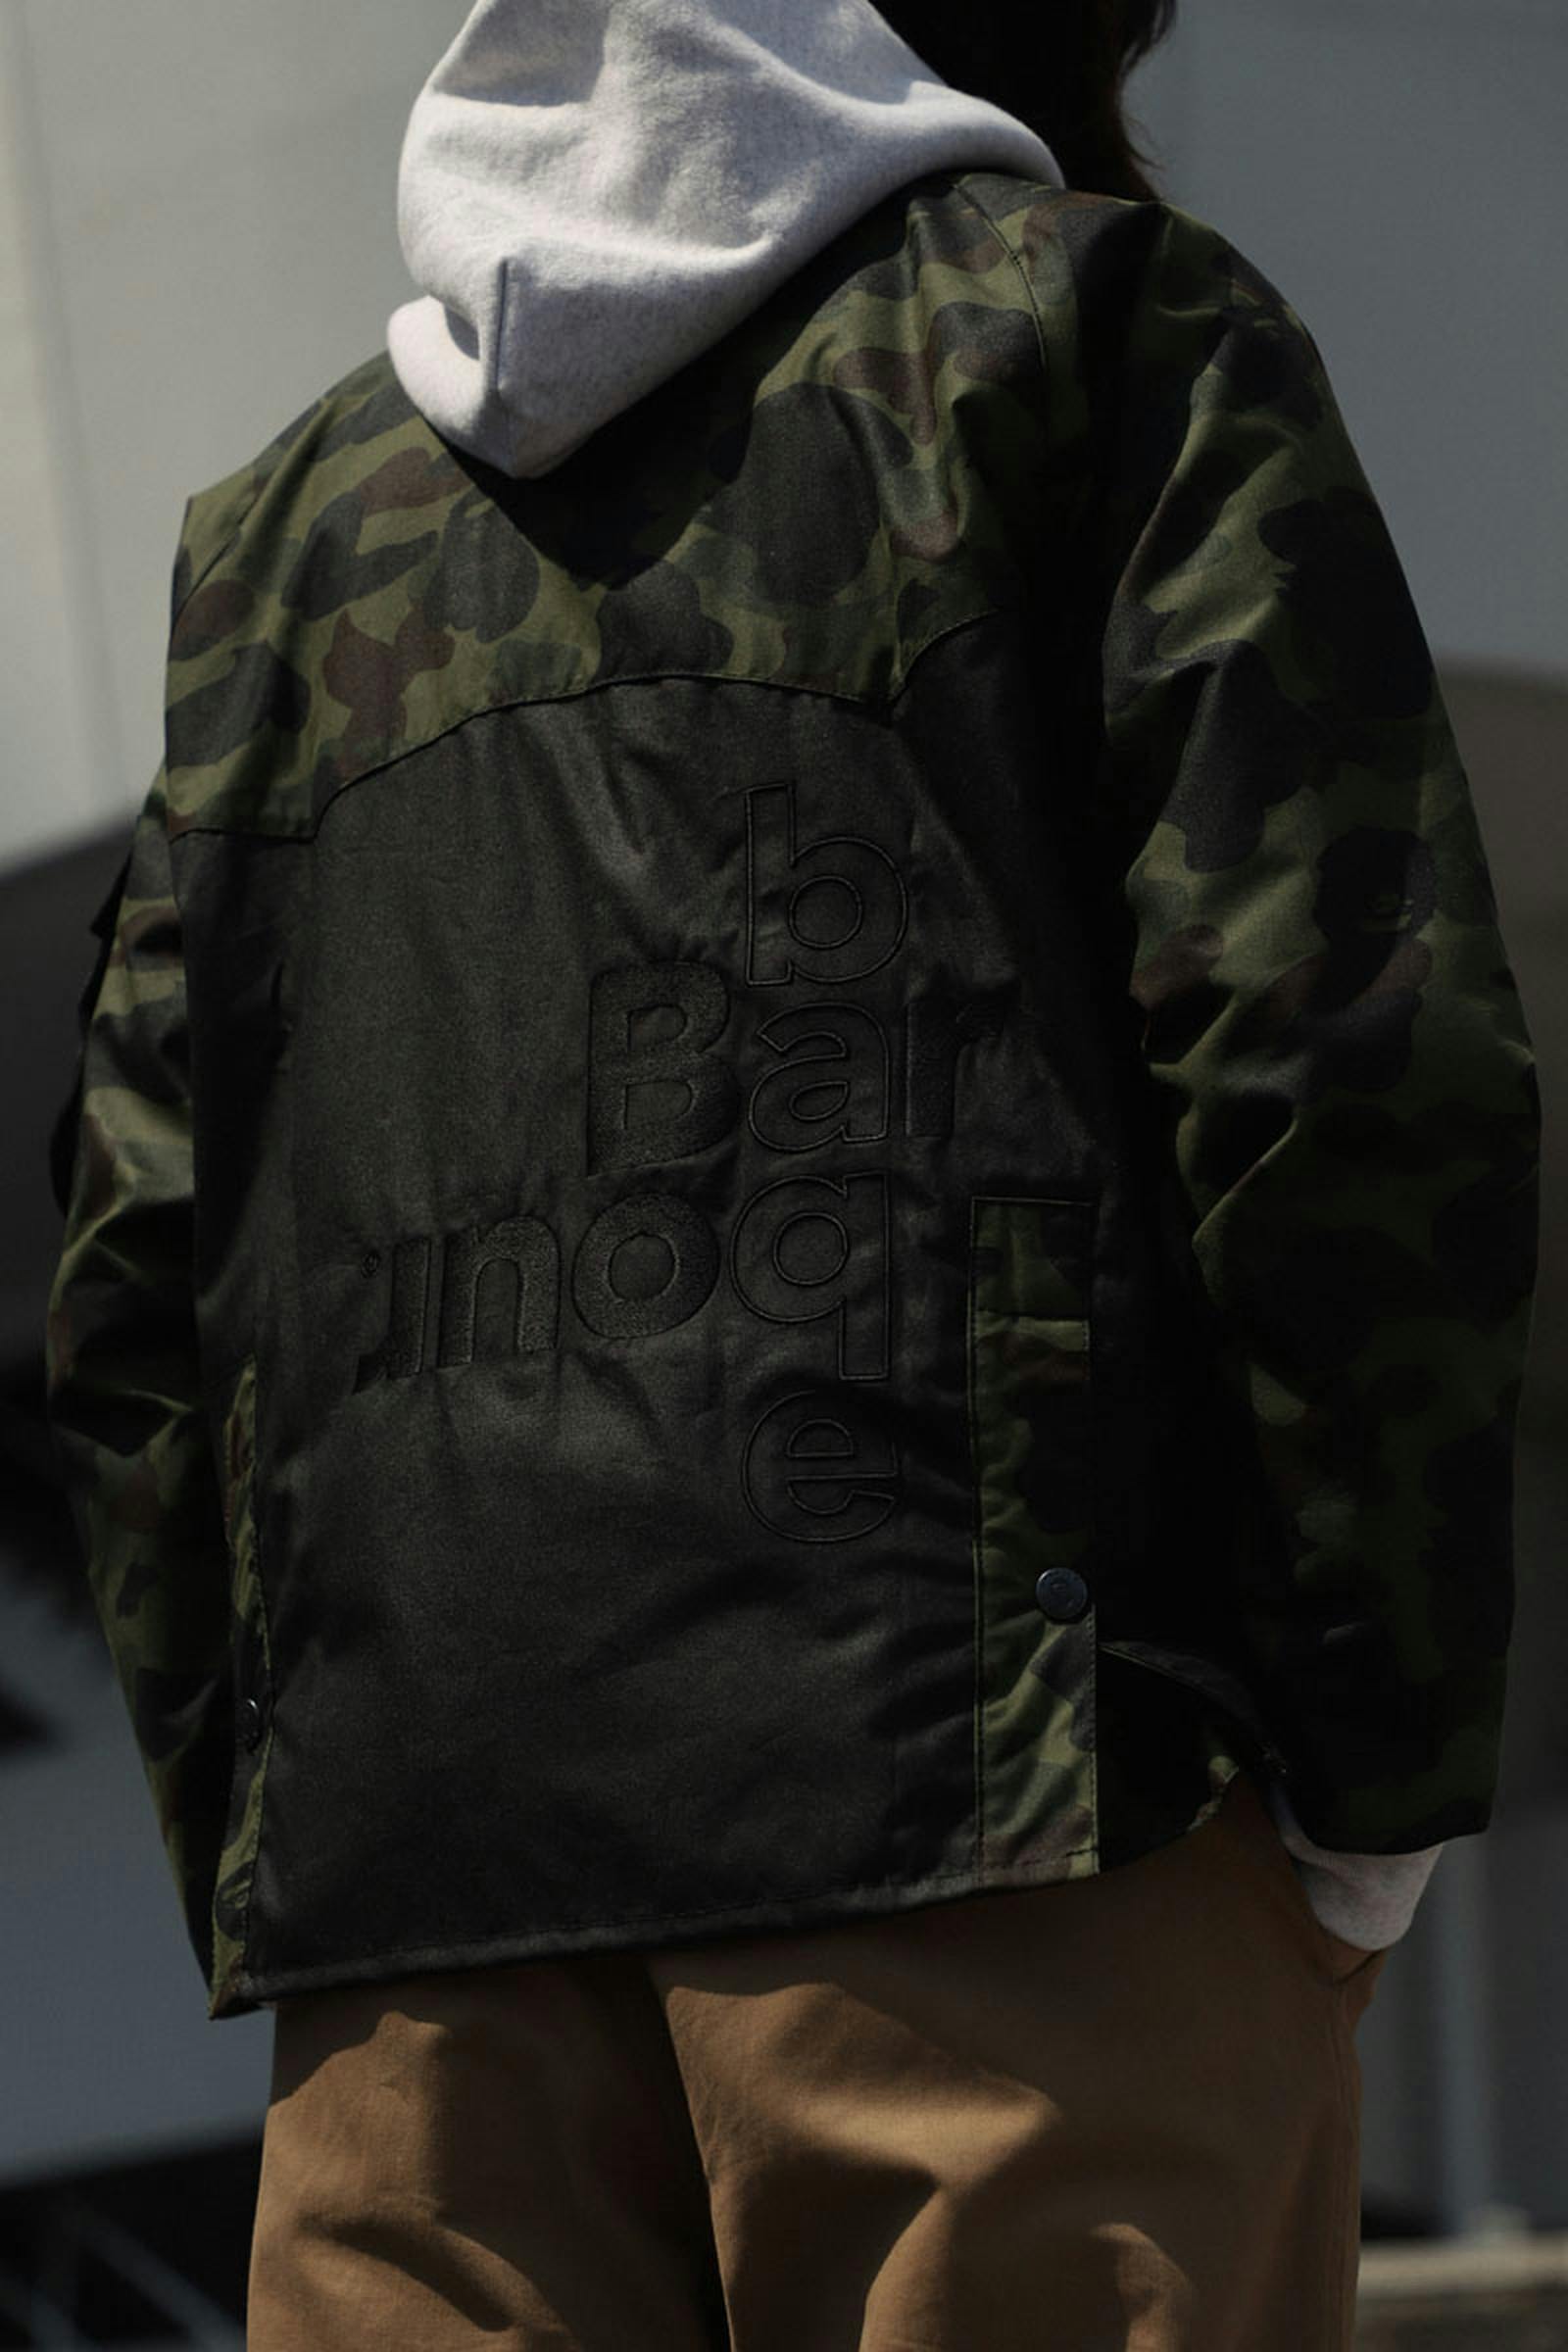 For AW21, Barbour Collaborates With A Bathing Ape For The First